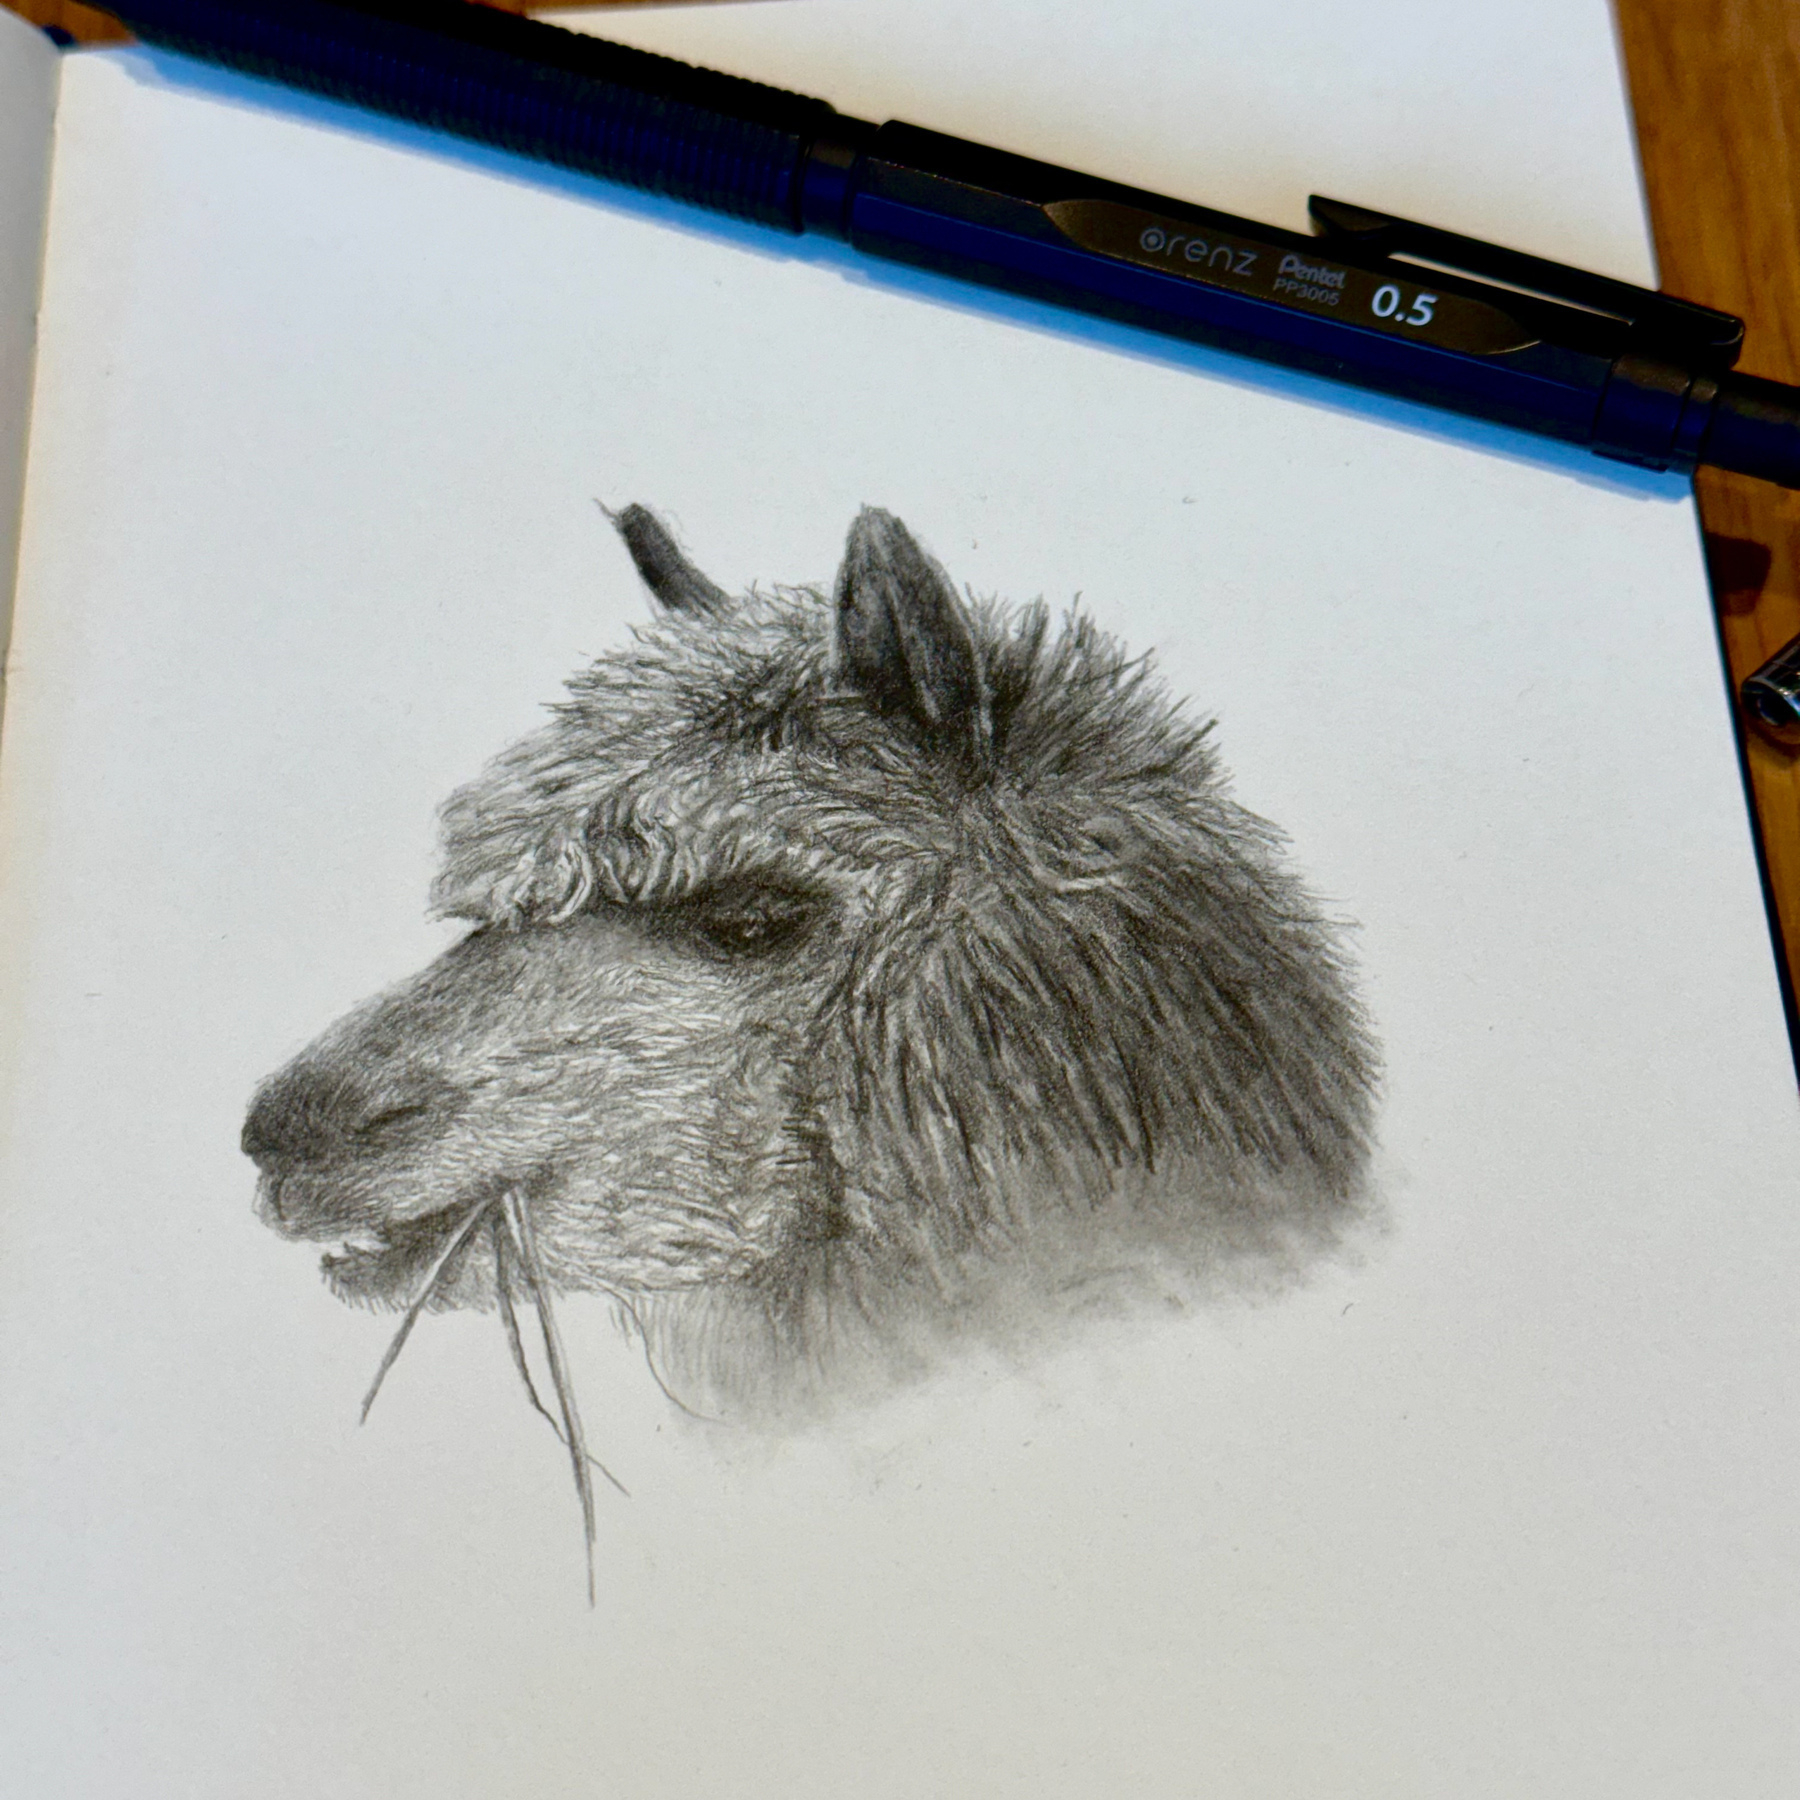 A meticulously detailed pencil drawing of an alpaca's head, with a focus on its fluffy fur and serene expression, positioned on a white page of a sketchbook, accompanied by a mechanical pencil resting above the drawing.